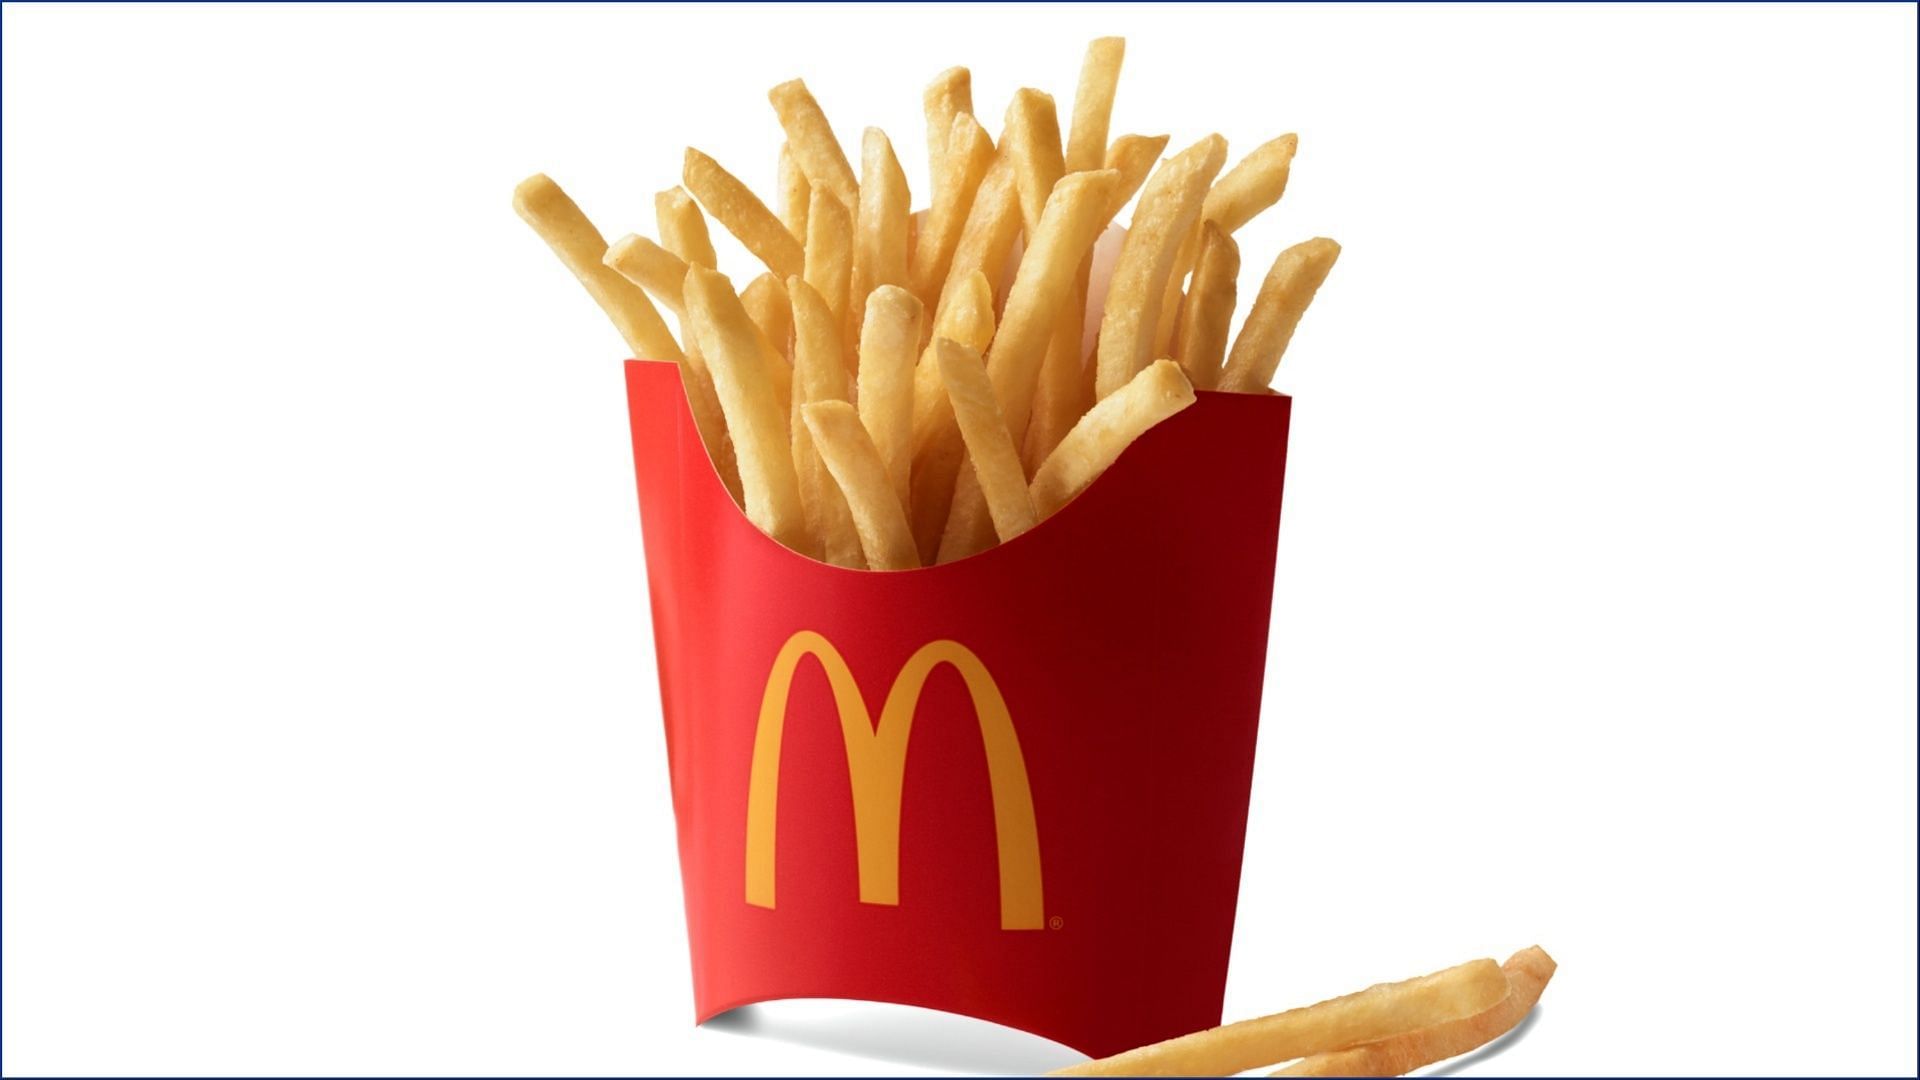 A free serving of medium fries can only be availed when ordering through the chain&#039;s app (Image via McDonald&rsquo;s)